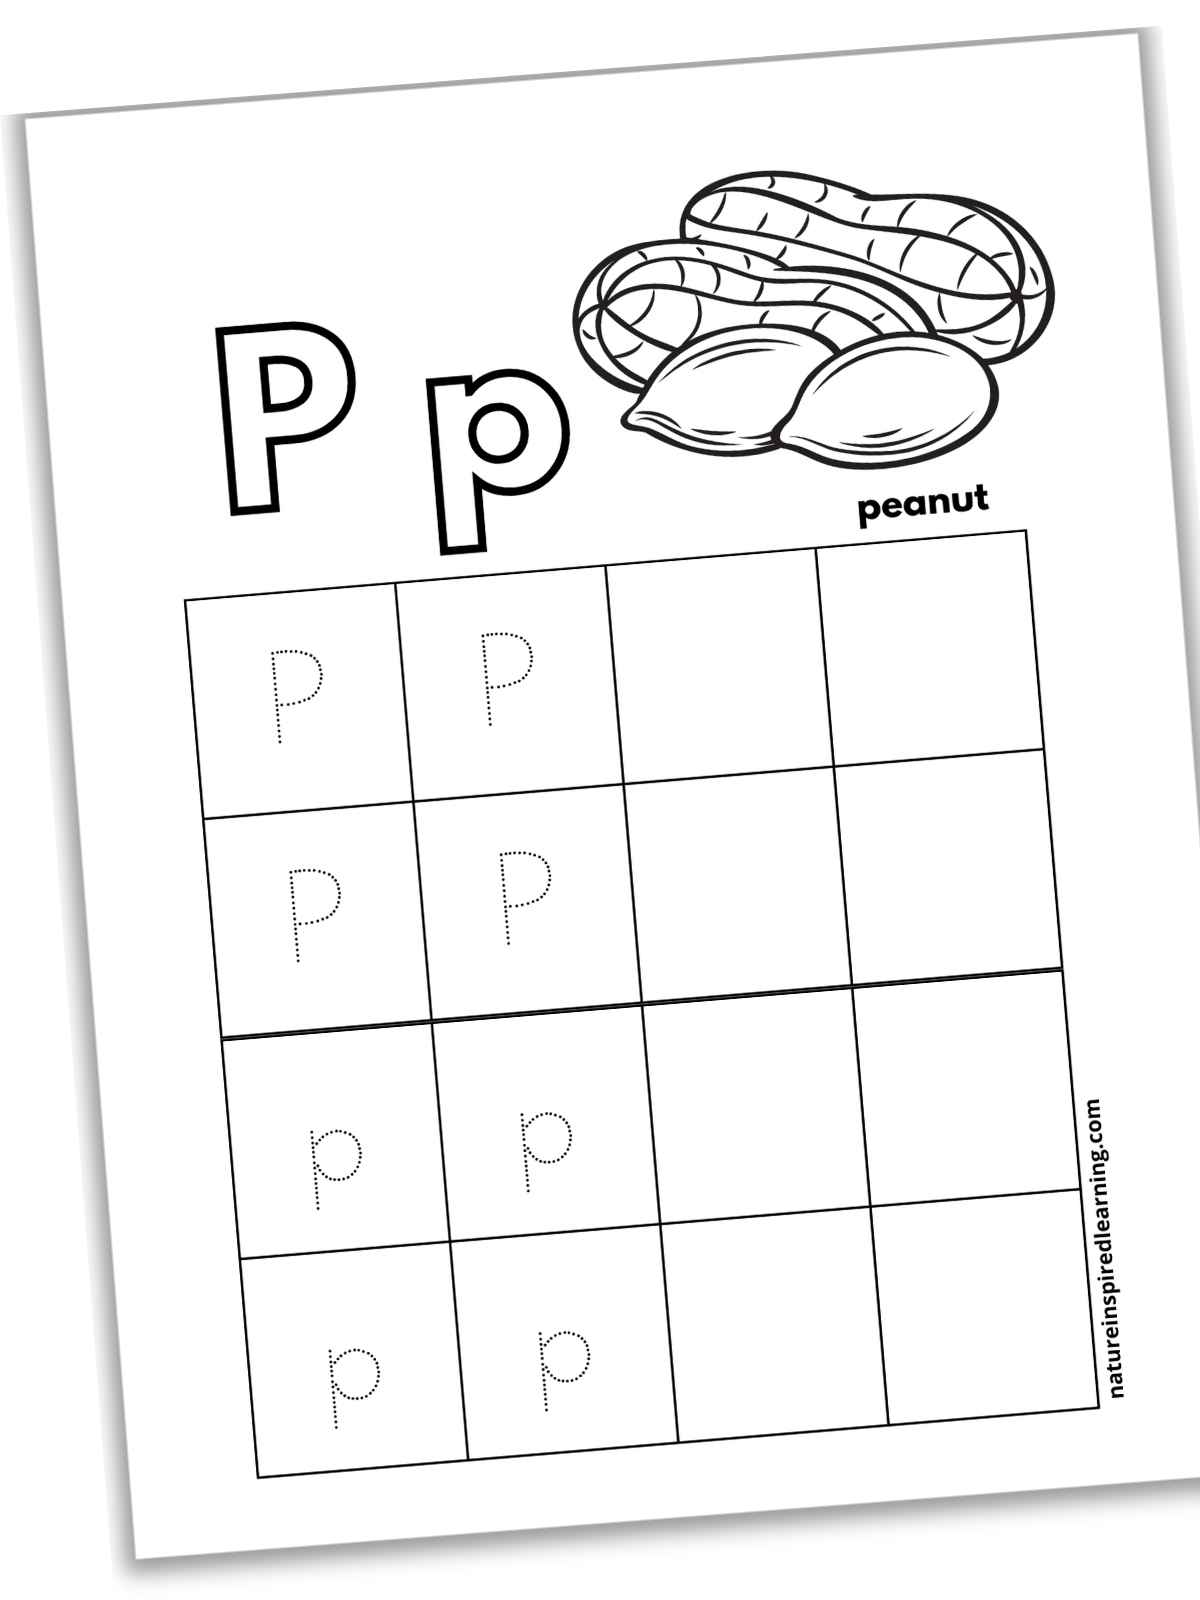 Worksheet with square grids with traceable P and p's and blank boxes. Outlines of P p at top next to peanuts